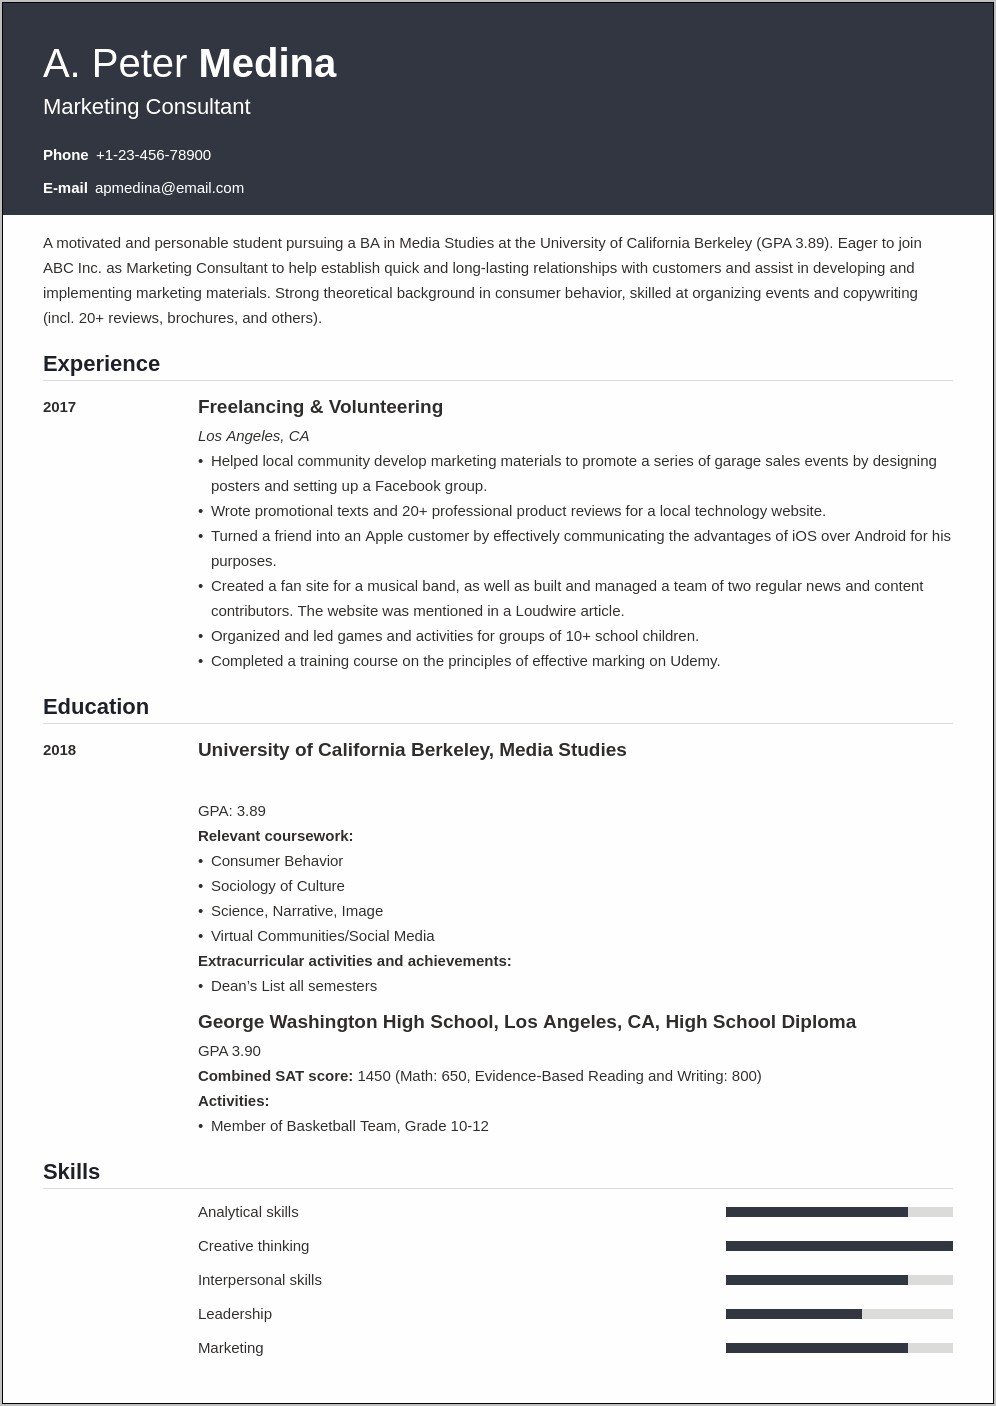 Resume Example Without College Degree